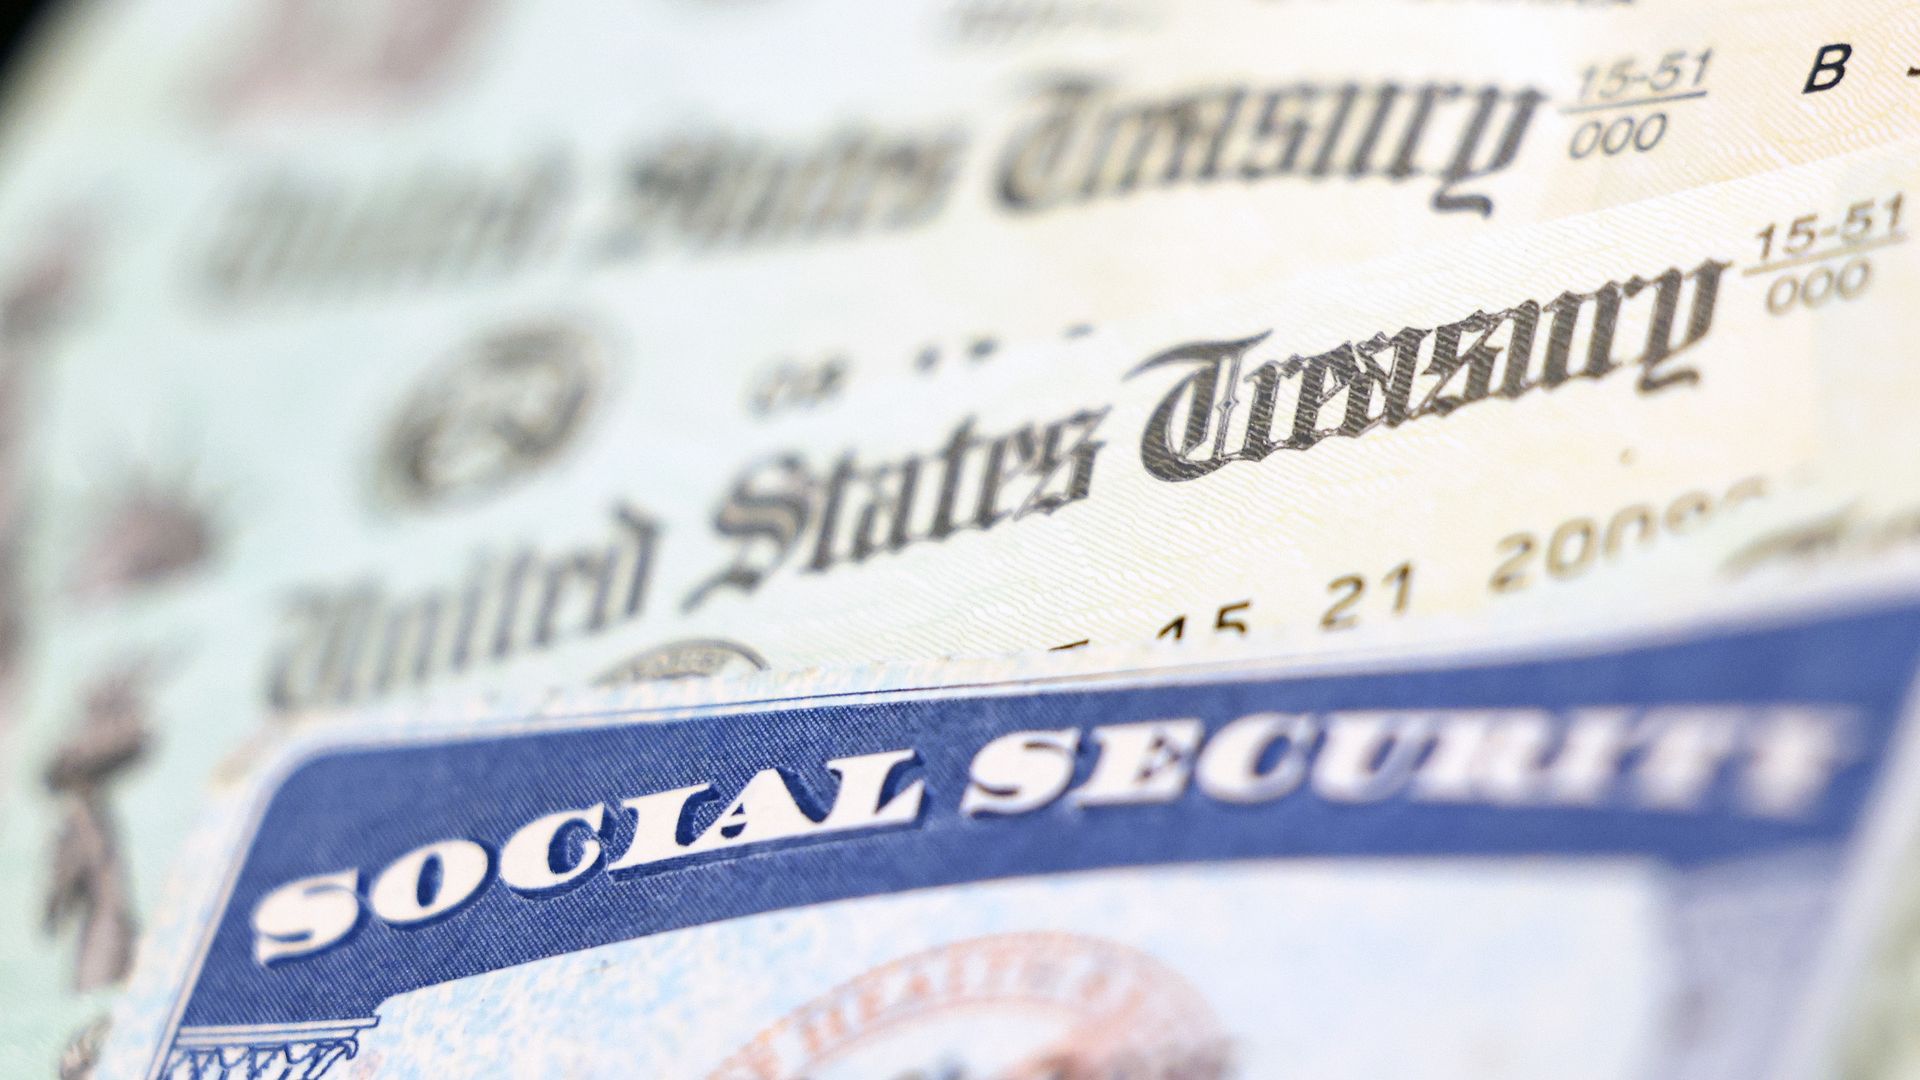 Social Security card on top of checks from United States Treasury